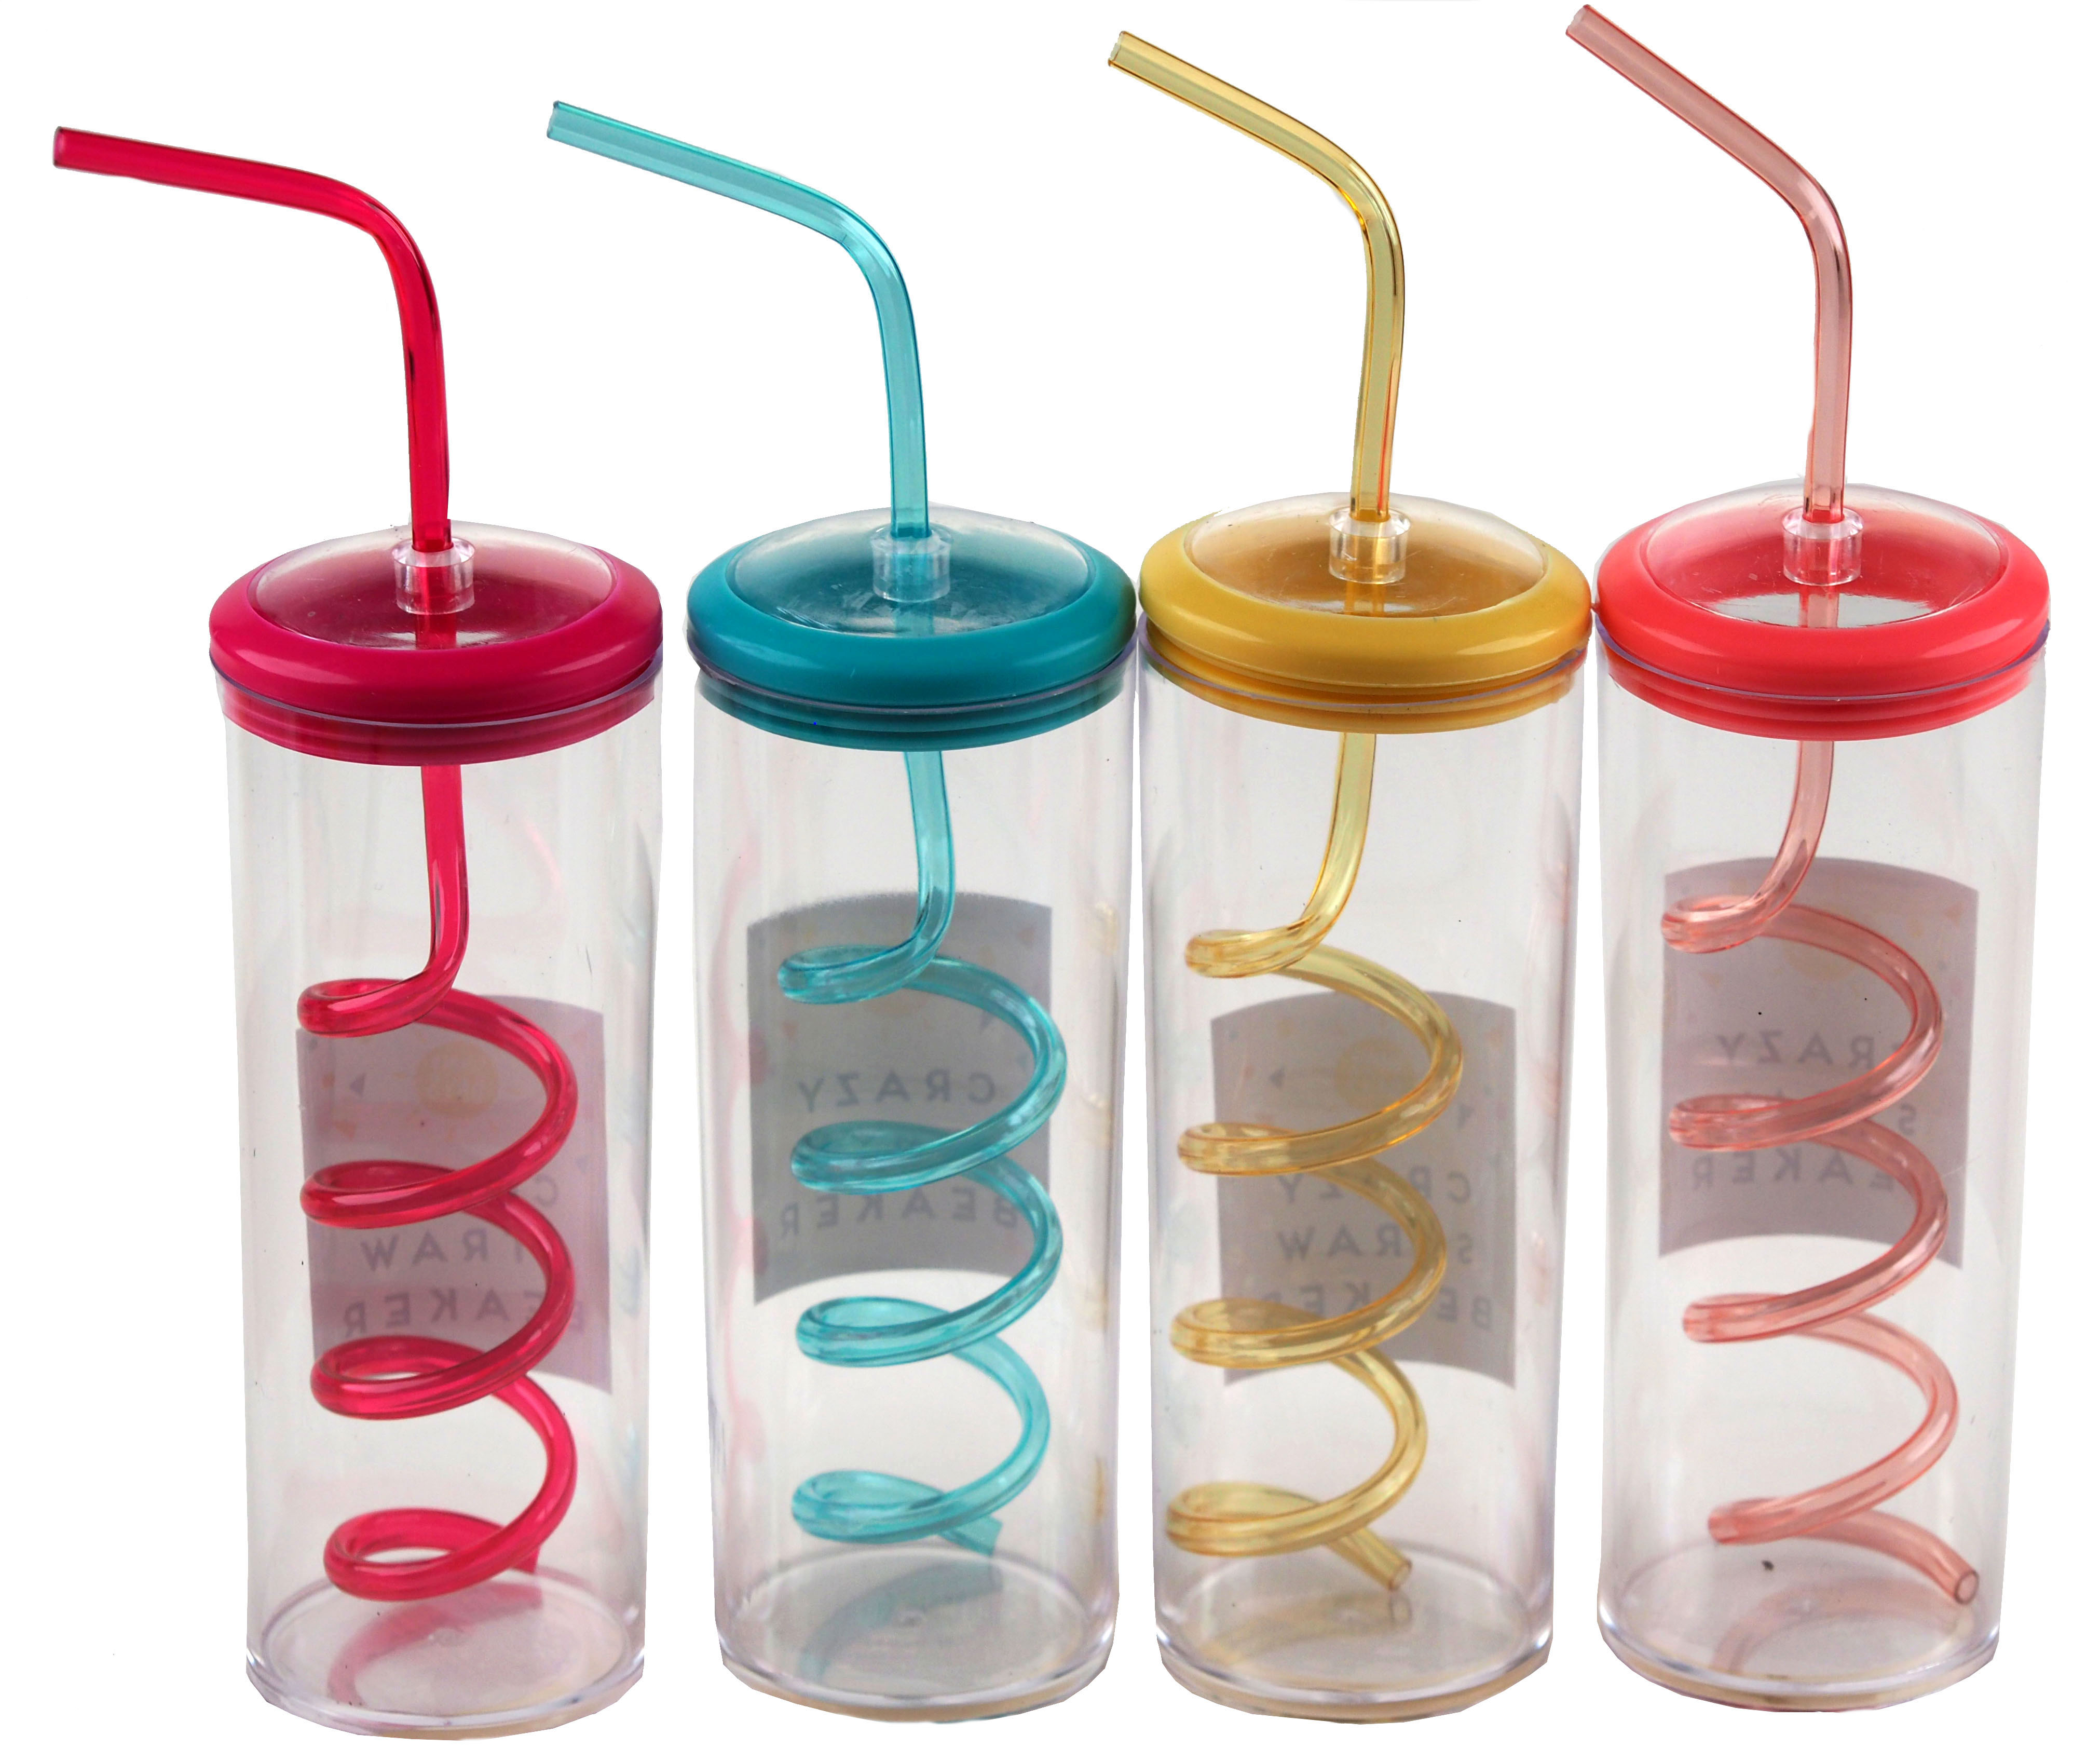 Transparent Drinking Beaker With Lid and Crazy Spiral Straw (Set of 4)